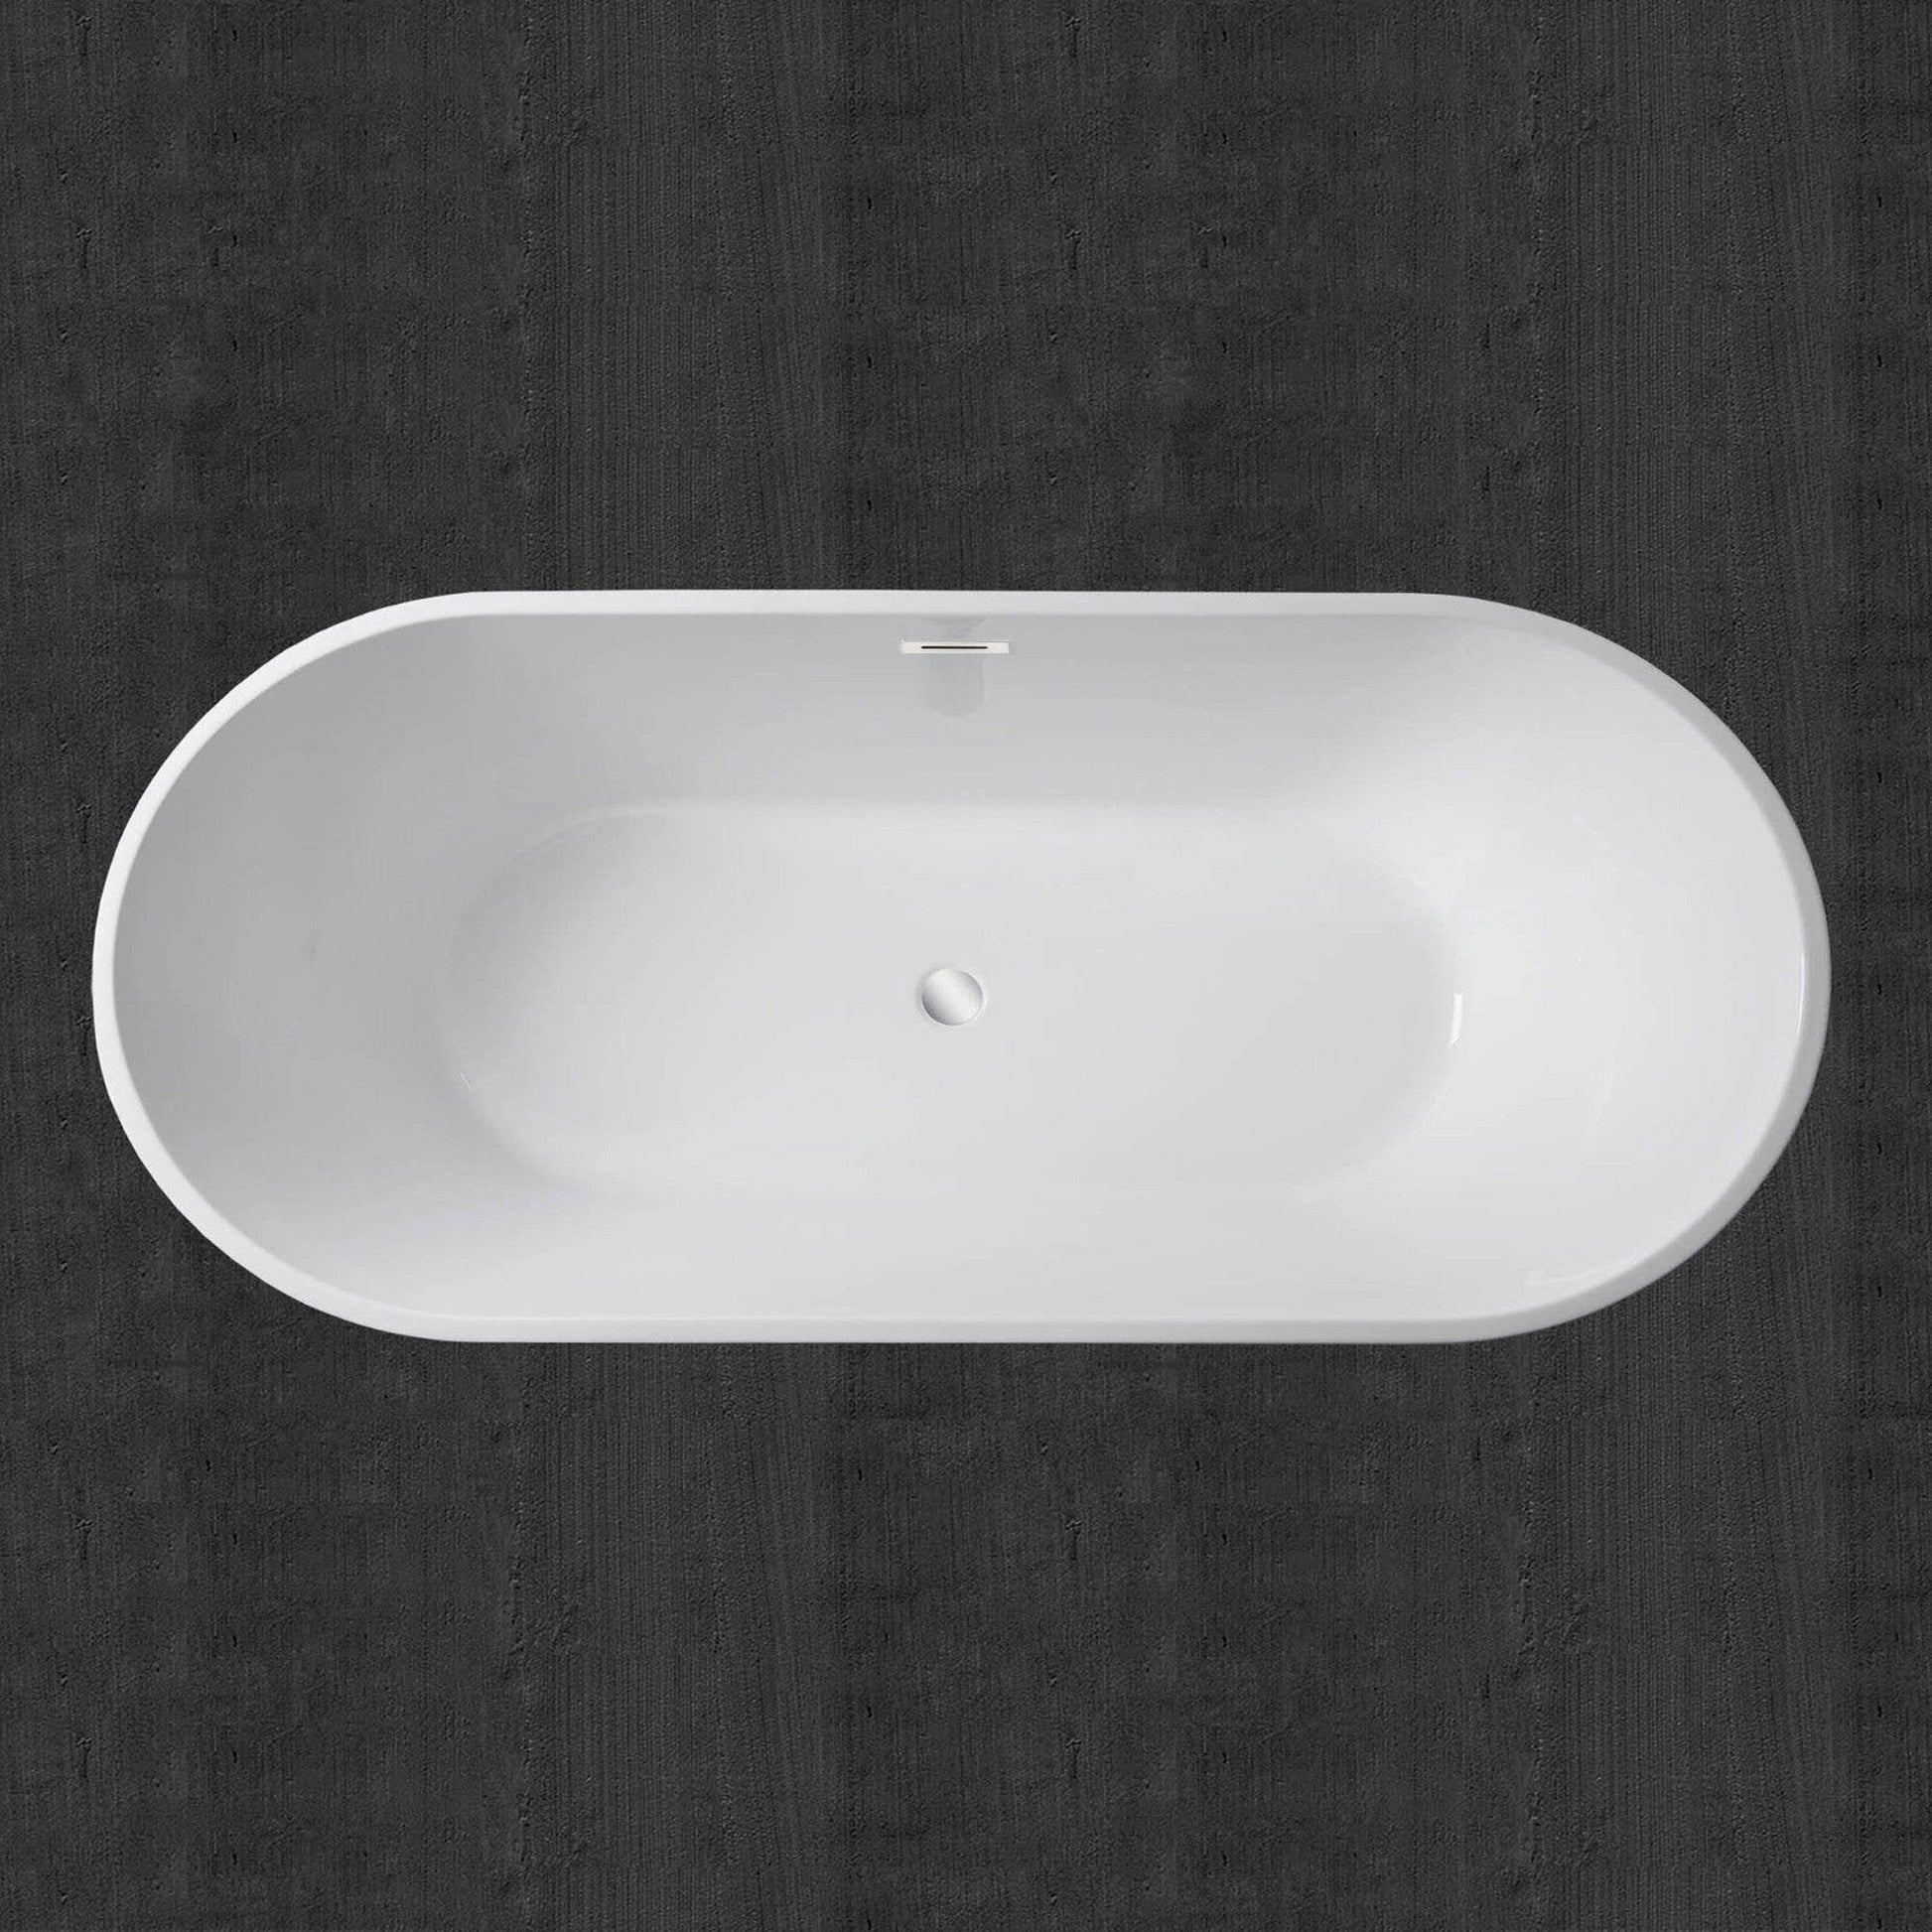 WoodBridge 71" White Acrylic Freestanding Contemporary Soaking Bathtub With Chrome Drain, Overflow, F-0004 Tub Filler and Caddy Tray